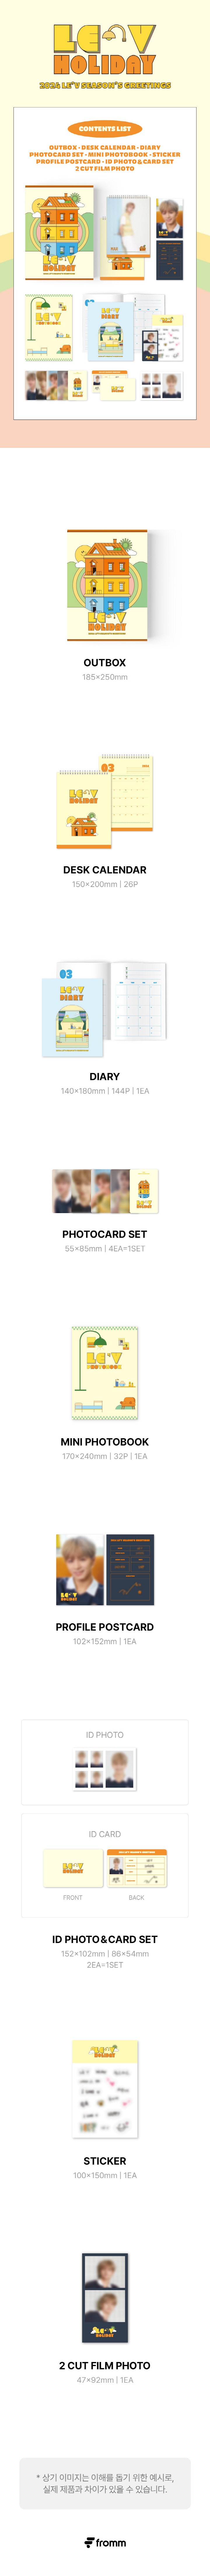 [Product specifications] OUTBOX: 185*250mm DESK CALENDAR: 150*200mm (26P) DIARY : 140*180mm (144P) PHOTOCARD SET : 55*85mm...